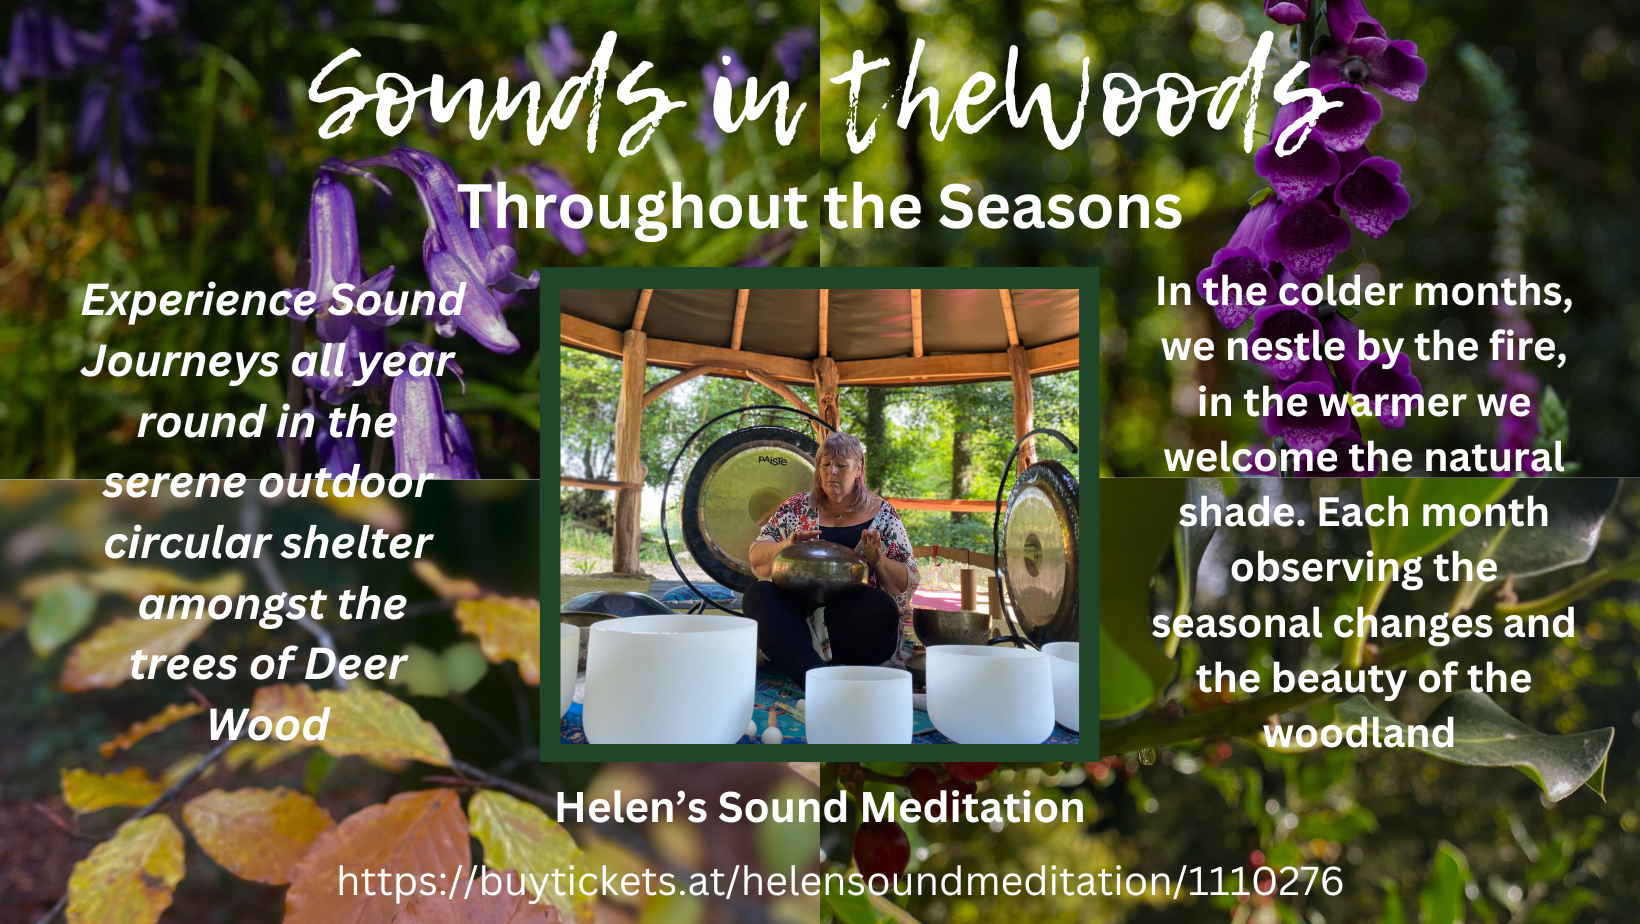 Sounds in theWoods